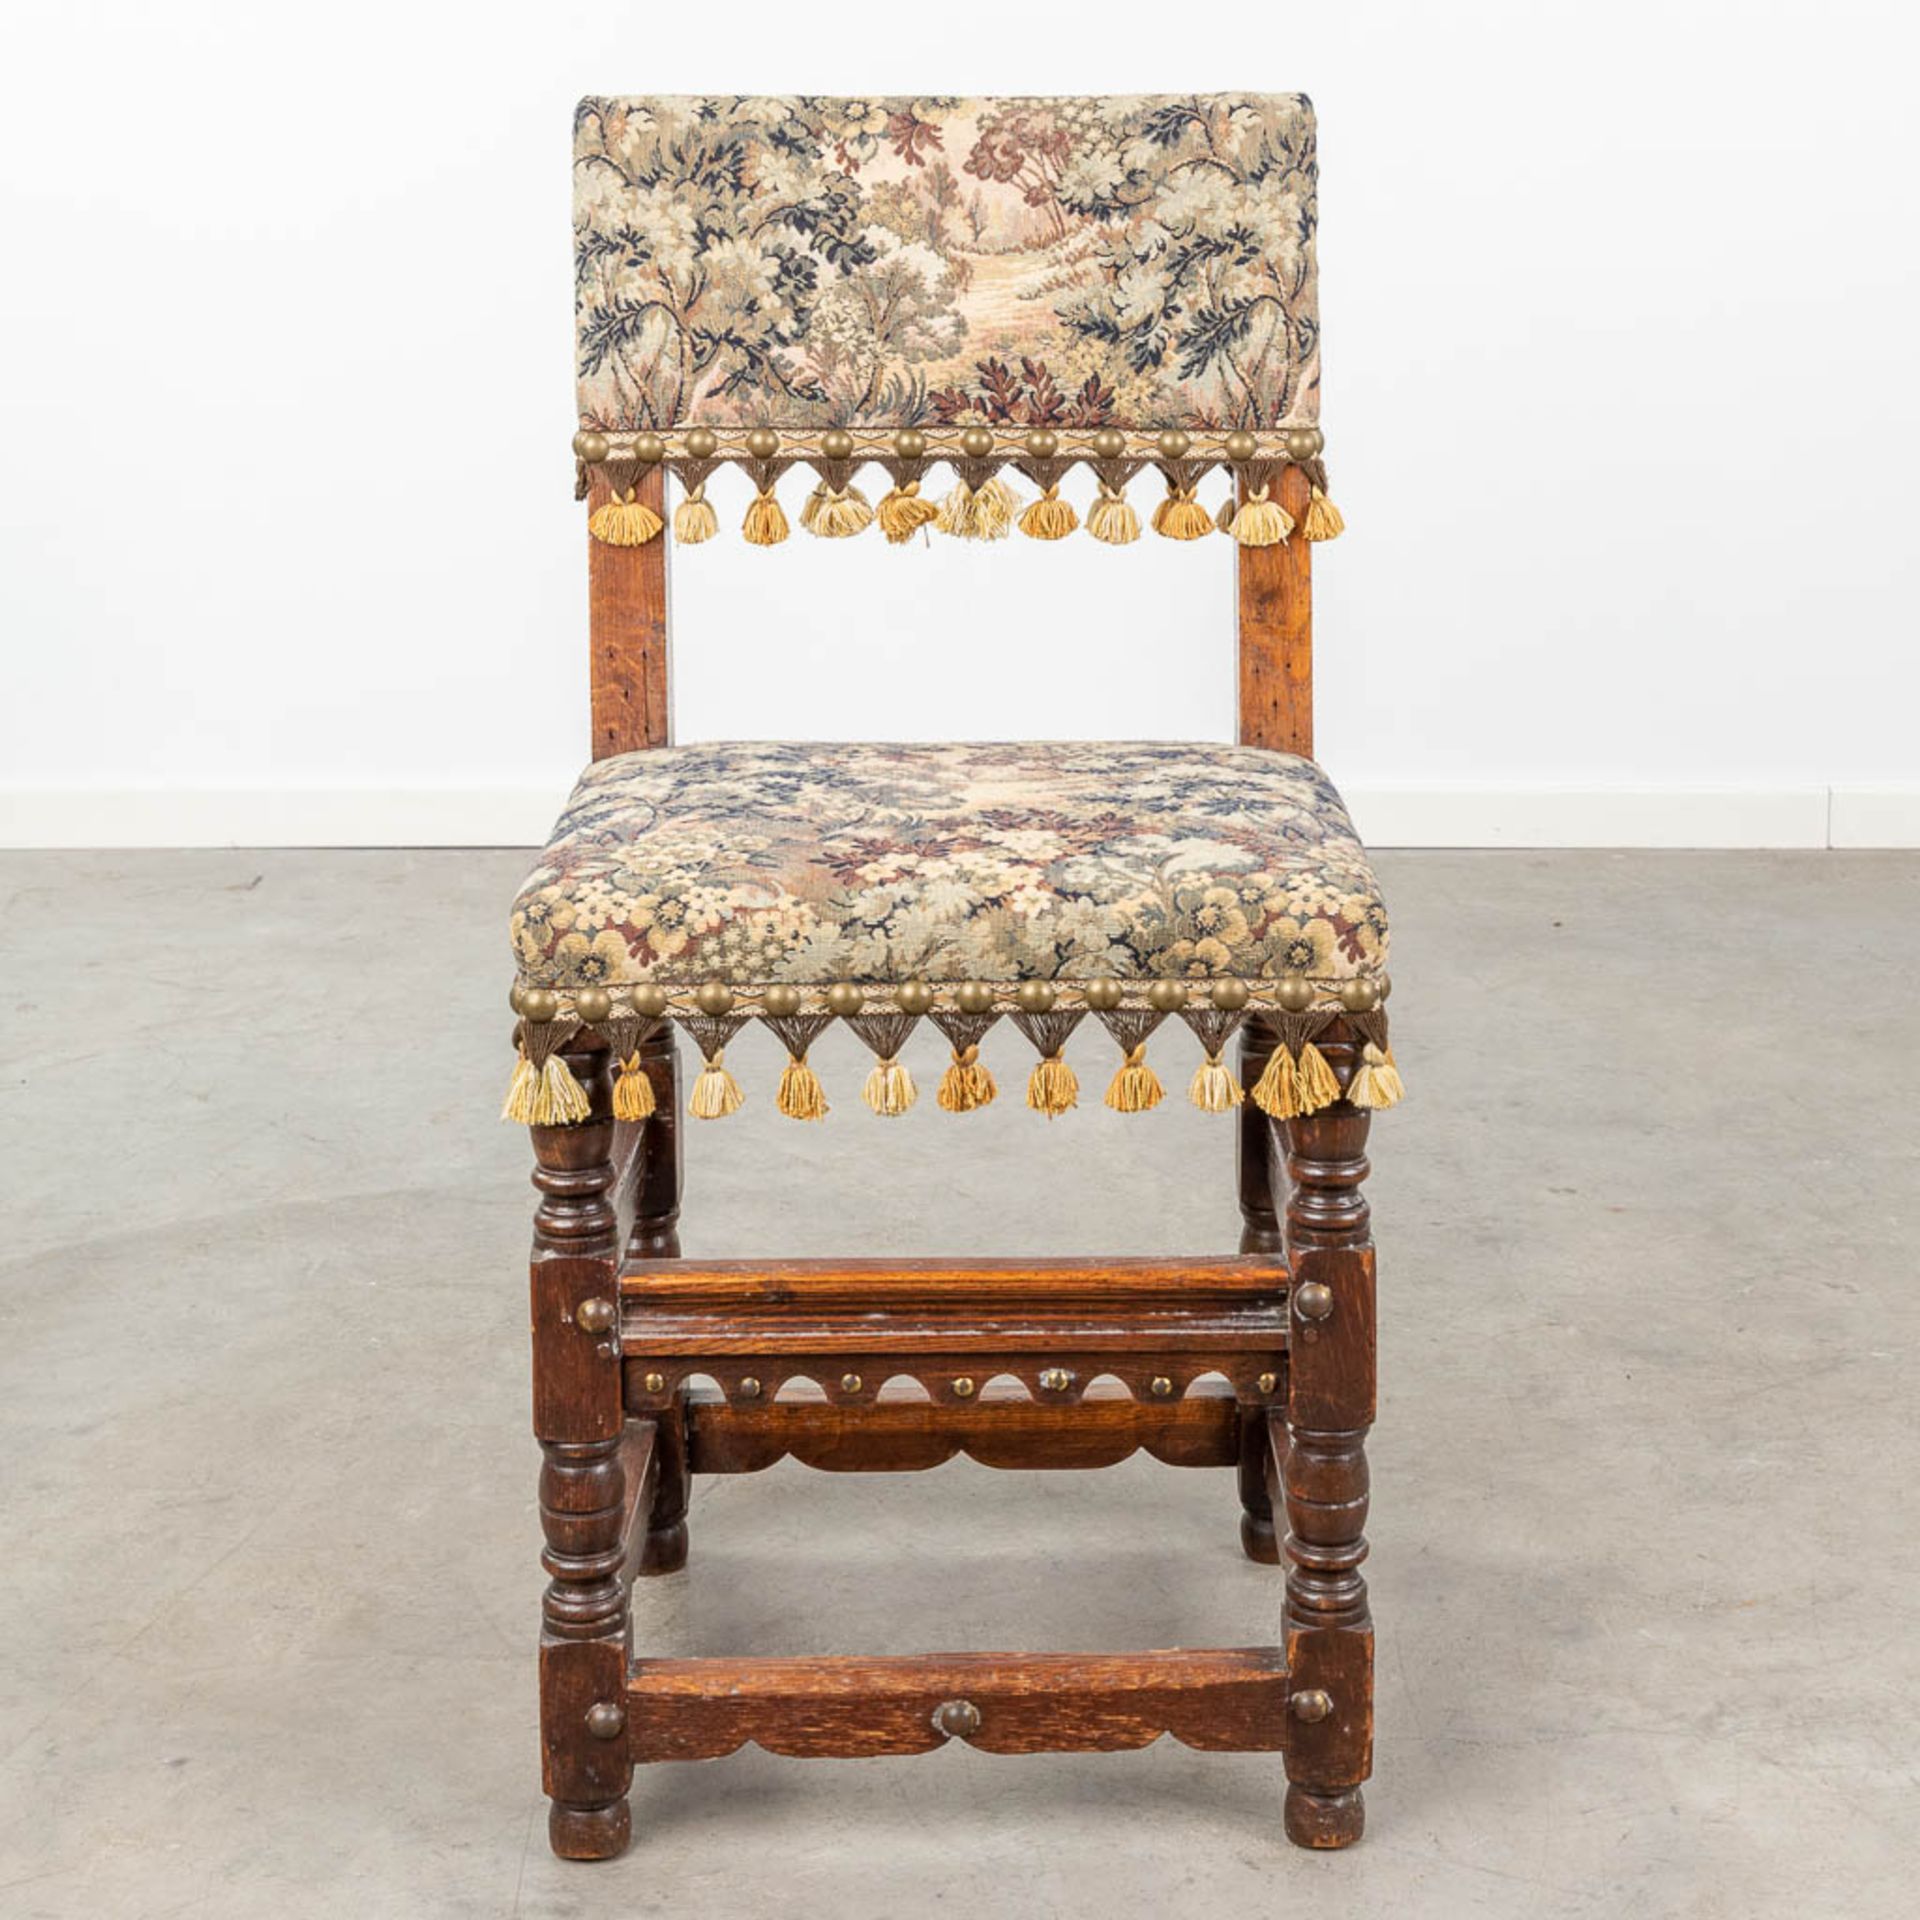 A set of 4 antique chairs, covered with tapestry upholstery. (L:40 x W:44 x H:88 cm) - Bild 6 aus 12